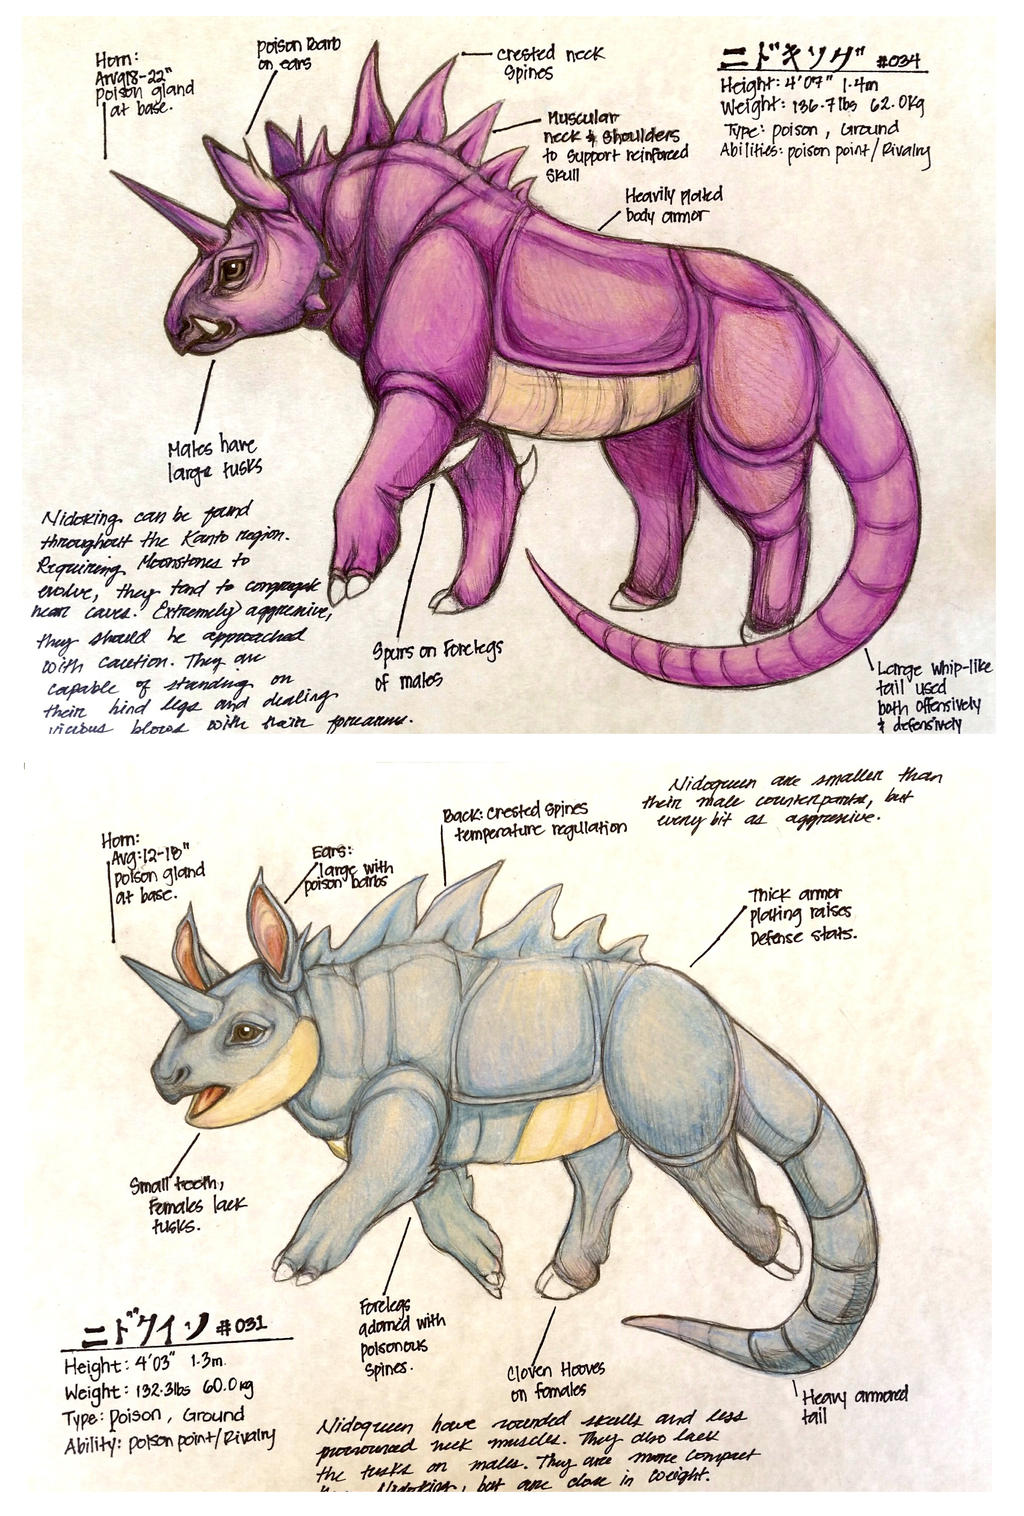 What is the difference between Nidoking vs. Nidoqueen in Pokemon?